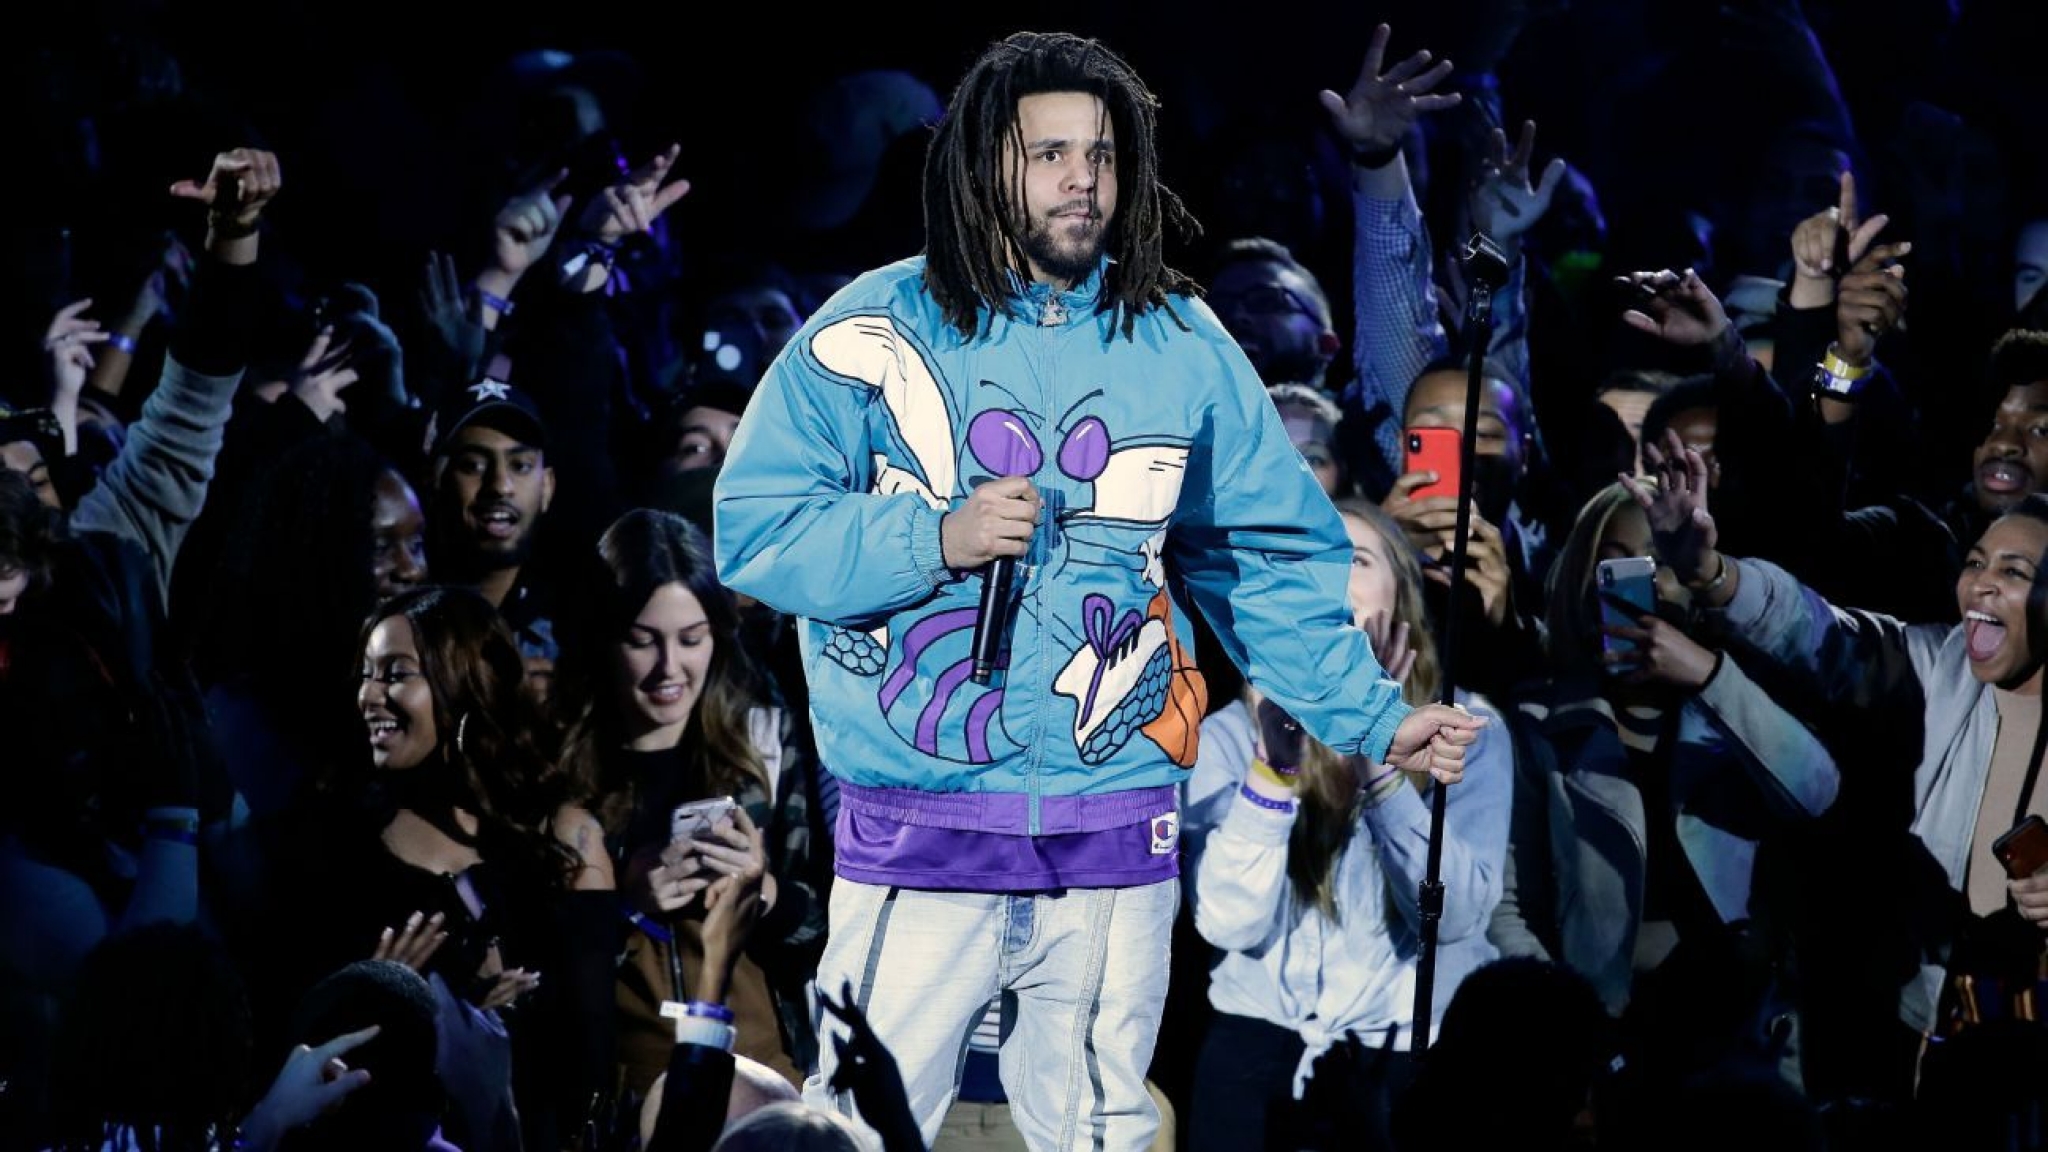 Sources: Rapper J. Cole to play hoops in Africa